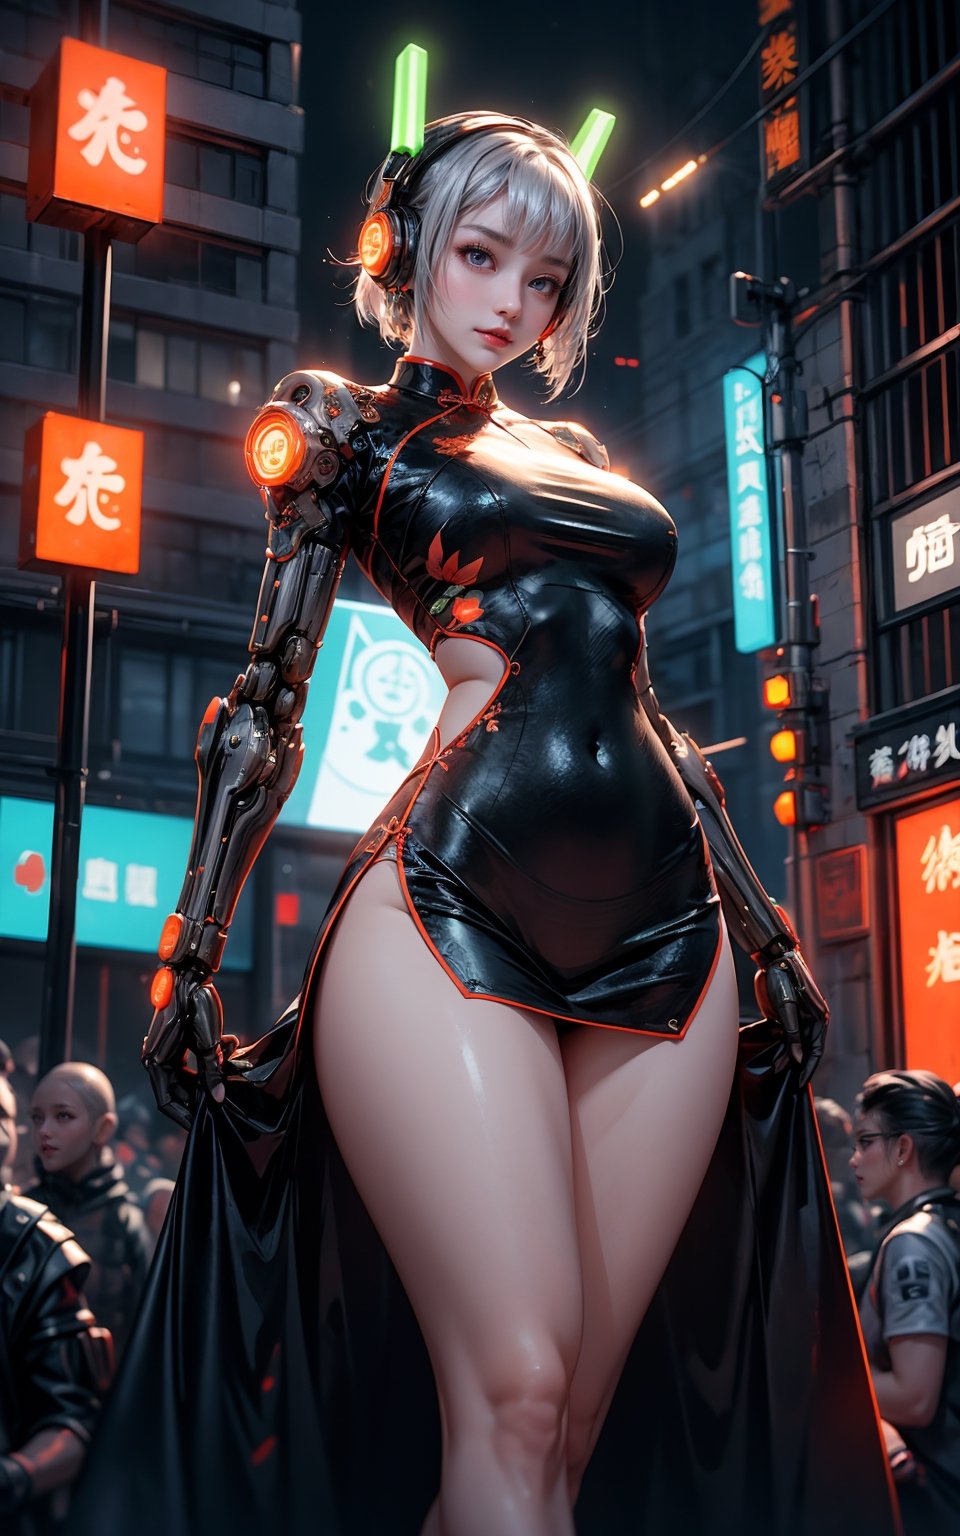 ((1 girl, adorable, happy)), ((chinese_clothes, cheongsam, cyberhanfu)), (headphones, white hair, short hair, blue eyes, makeup), (large breasts, large ass, thick thighs, wide hips, abs, voloptuous), cyberpunk city, dynamic pose, detailed luminous headphones, glowing hair accessories, glowing earrings, glowing necklace, cyberpunk, high-tech city, full of mechanical and futuristic elements, futurism, technology, glowing neon, orange, orange light, transparent streamers, laser, digital background urban sky, big moon